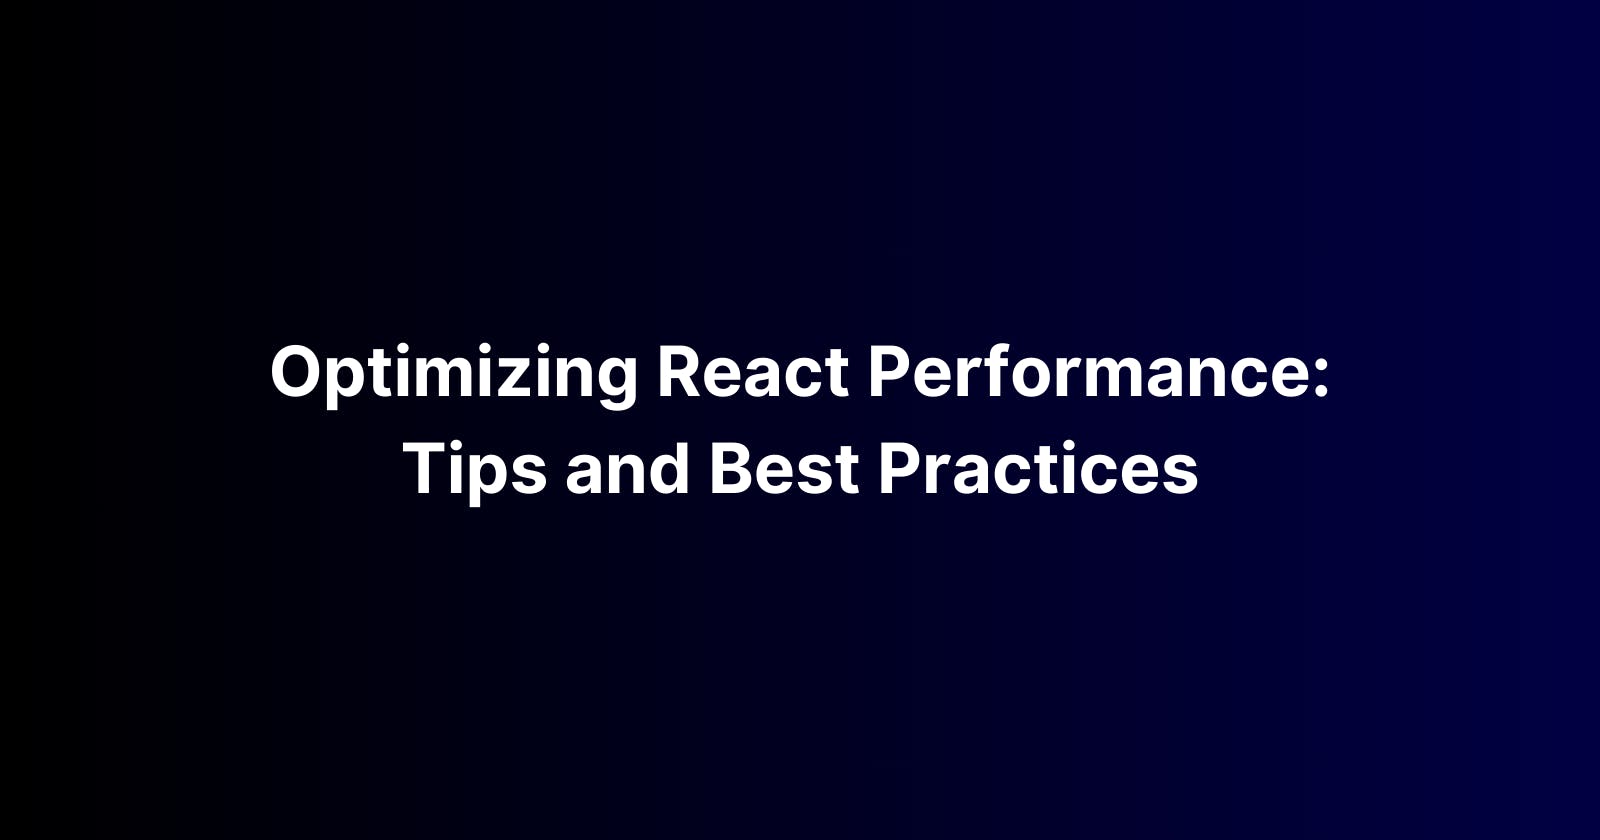 Optimizing React Performance: Tips and Best Practices